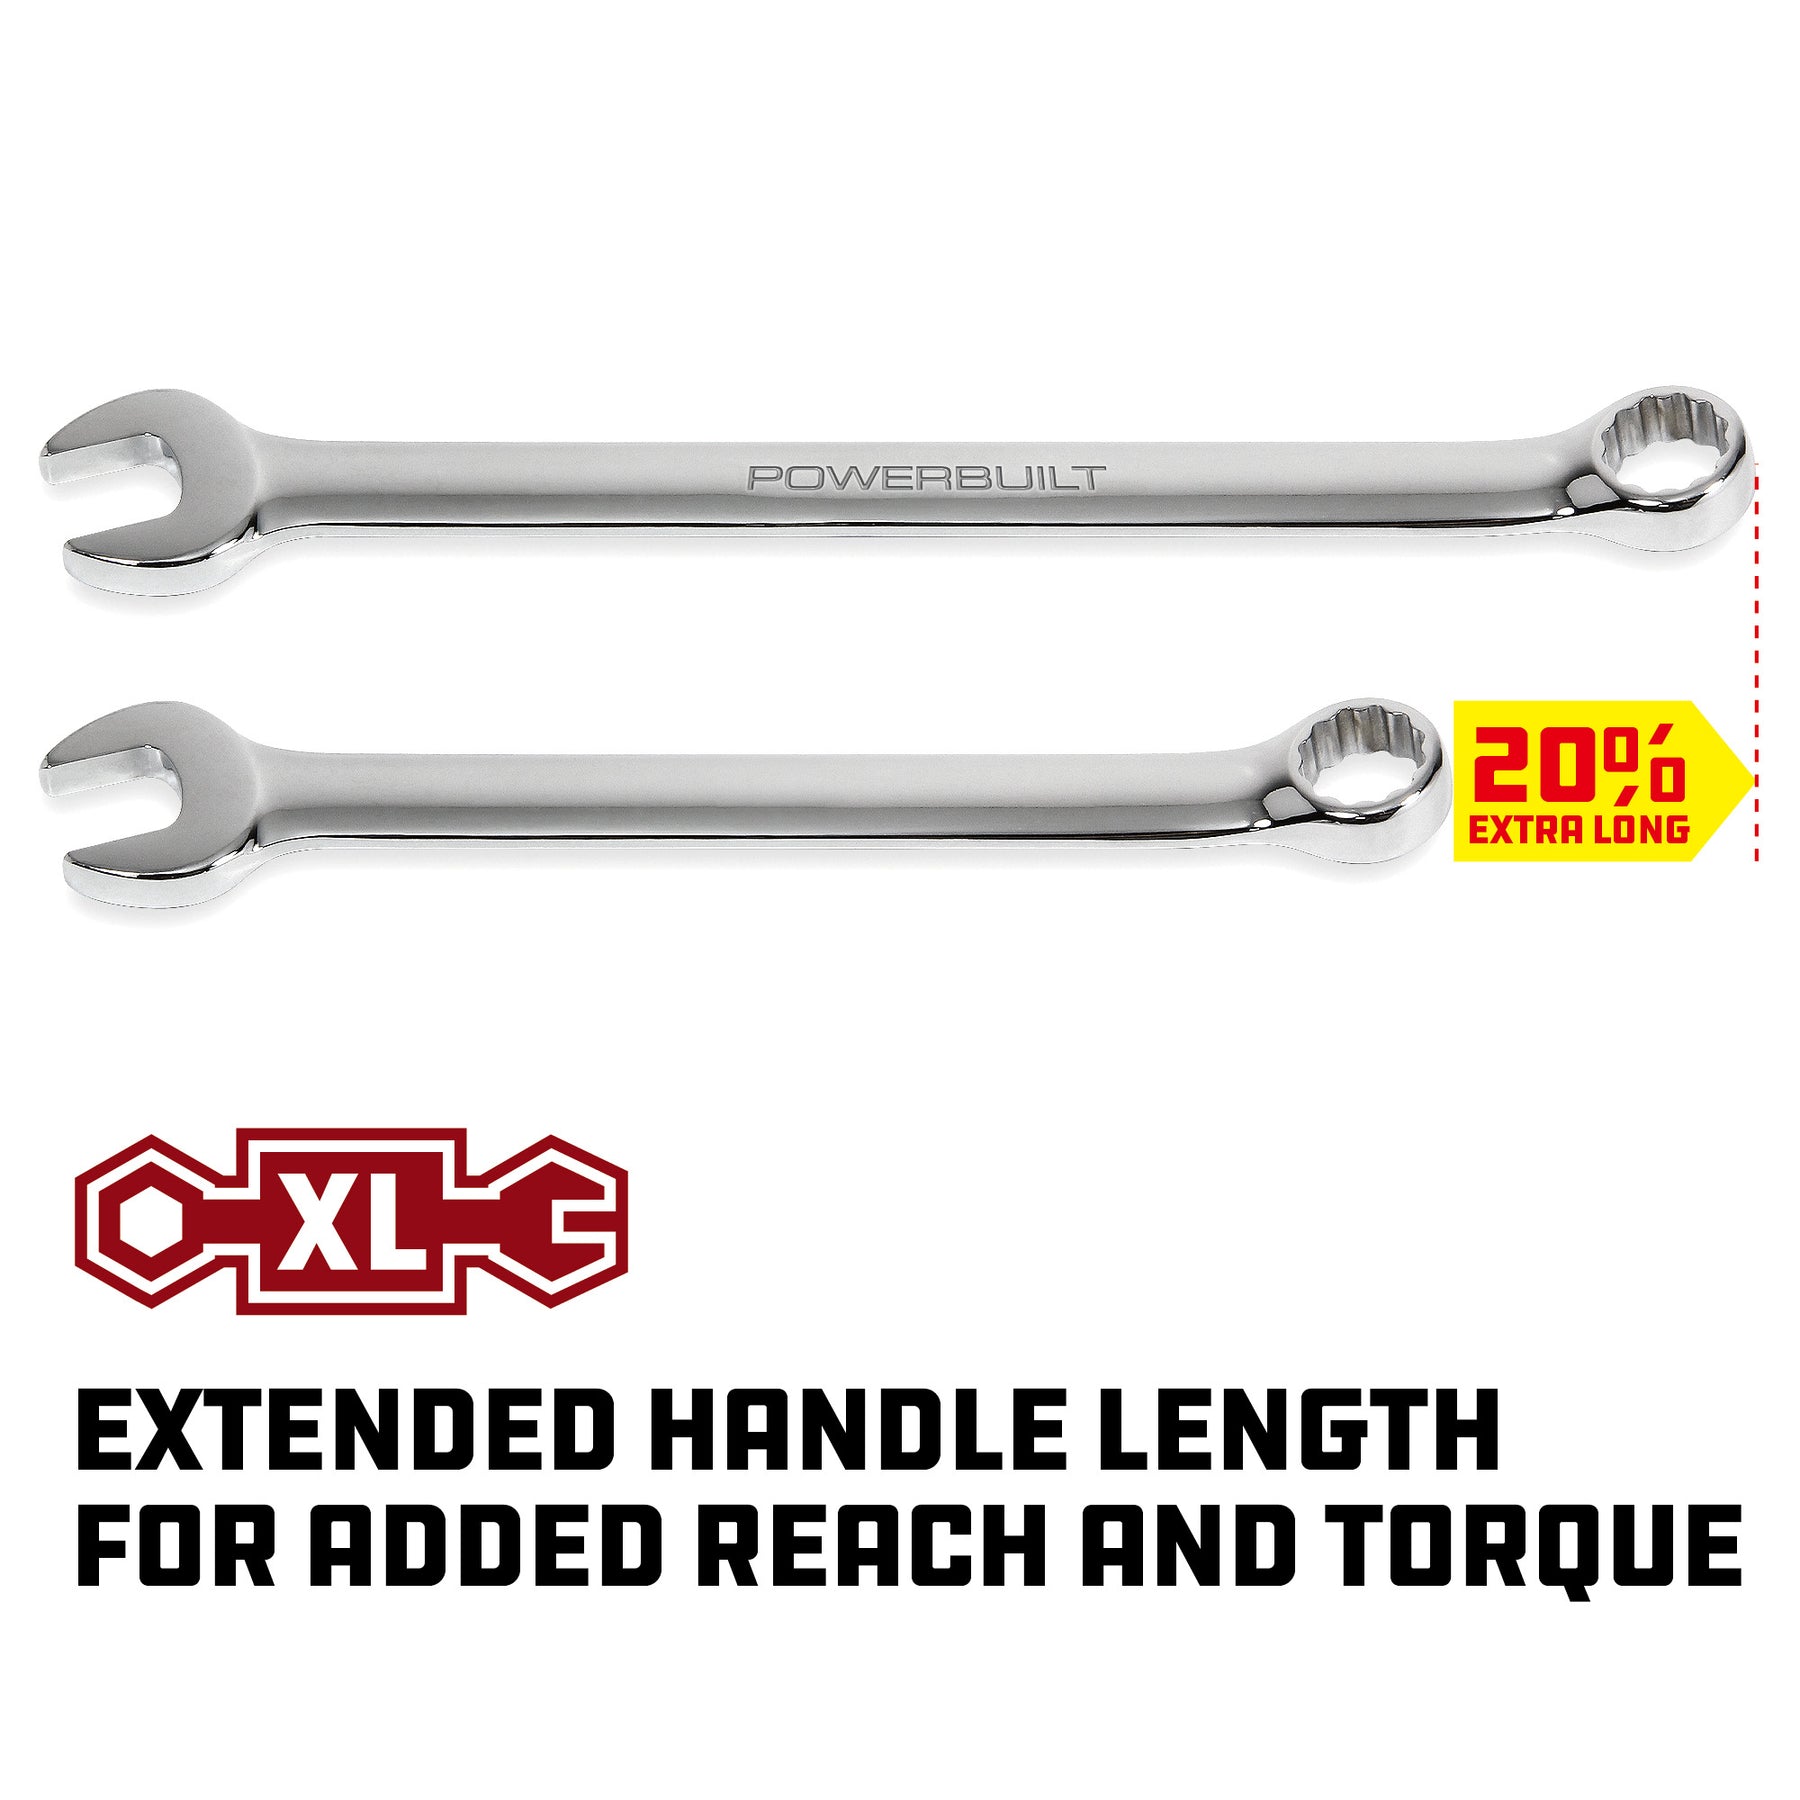 32 MM Fully Polished Long Pattern SAE Combination Wrench